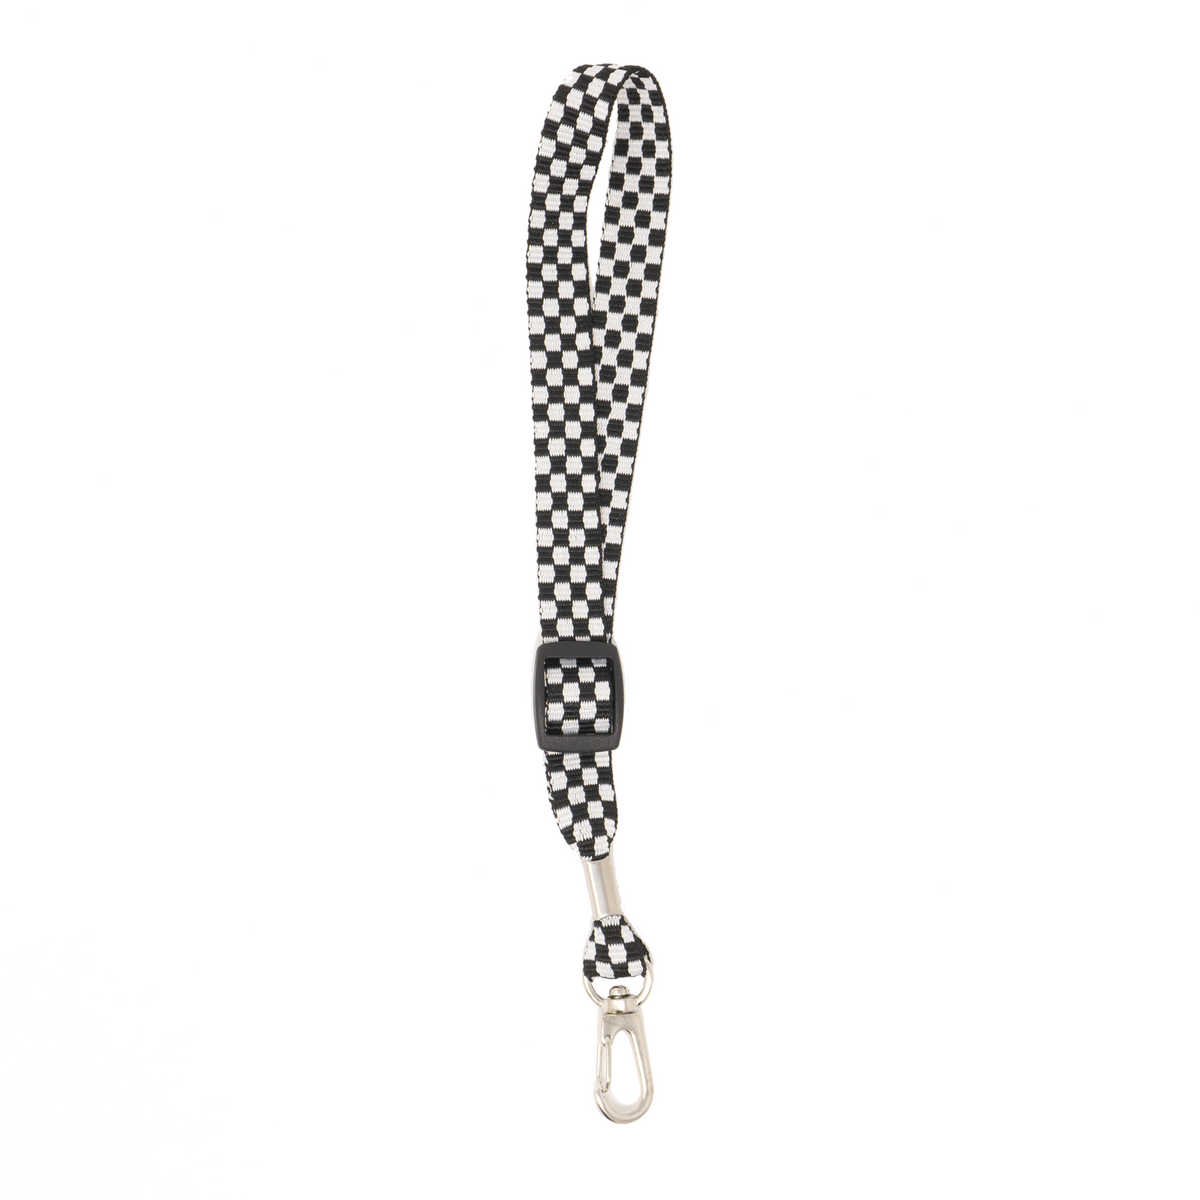 My Fave Wristlet in B&W Checkered